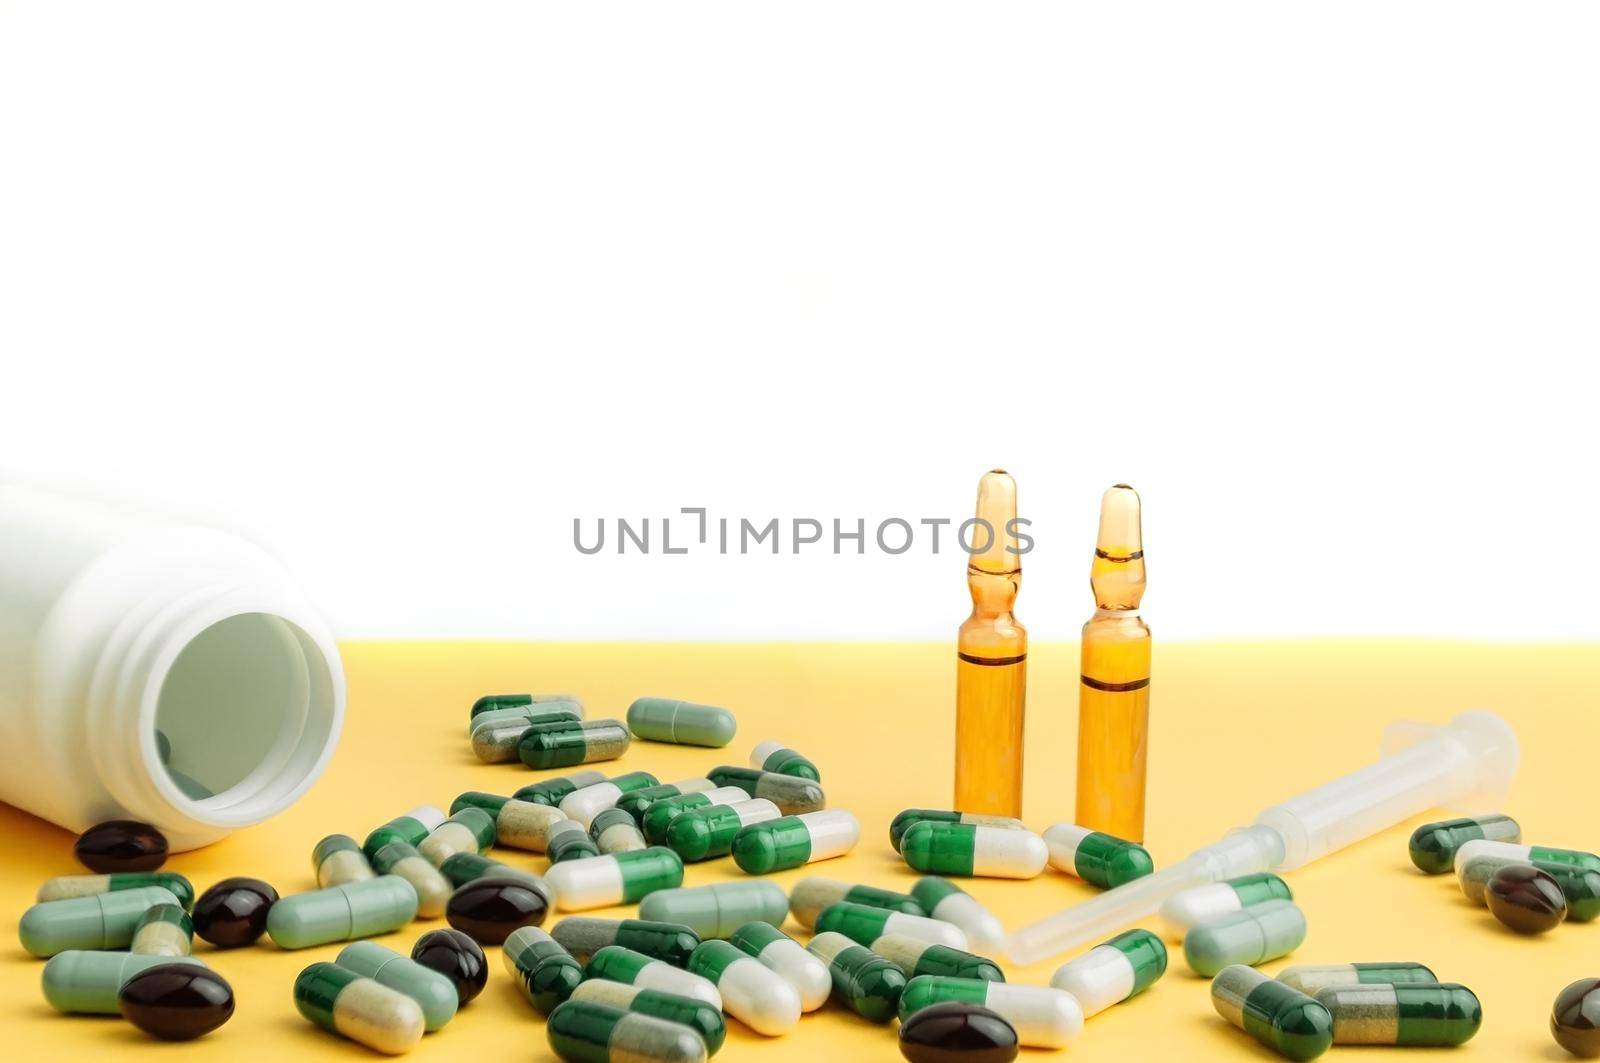 drug in tablets and capsules, ampoules with medicines, syringes isolated on white background. Pharmacy, people and health concept. Online drug orders, online shopping.